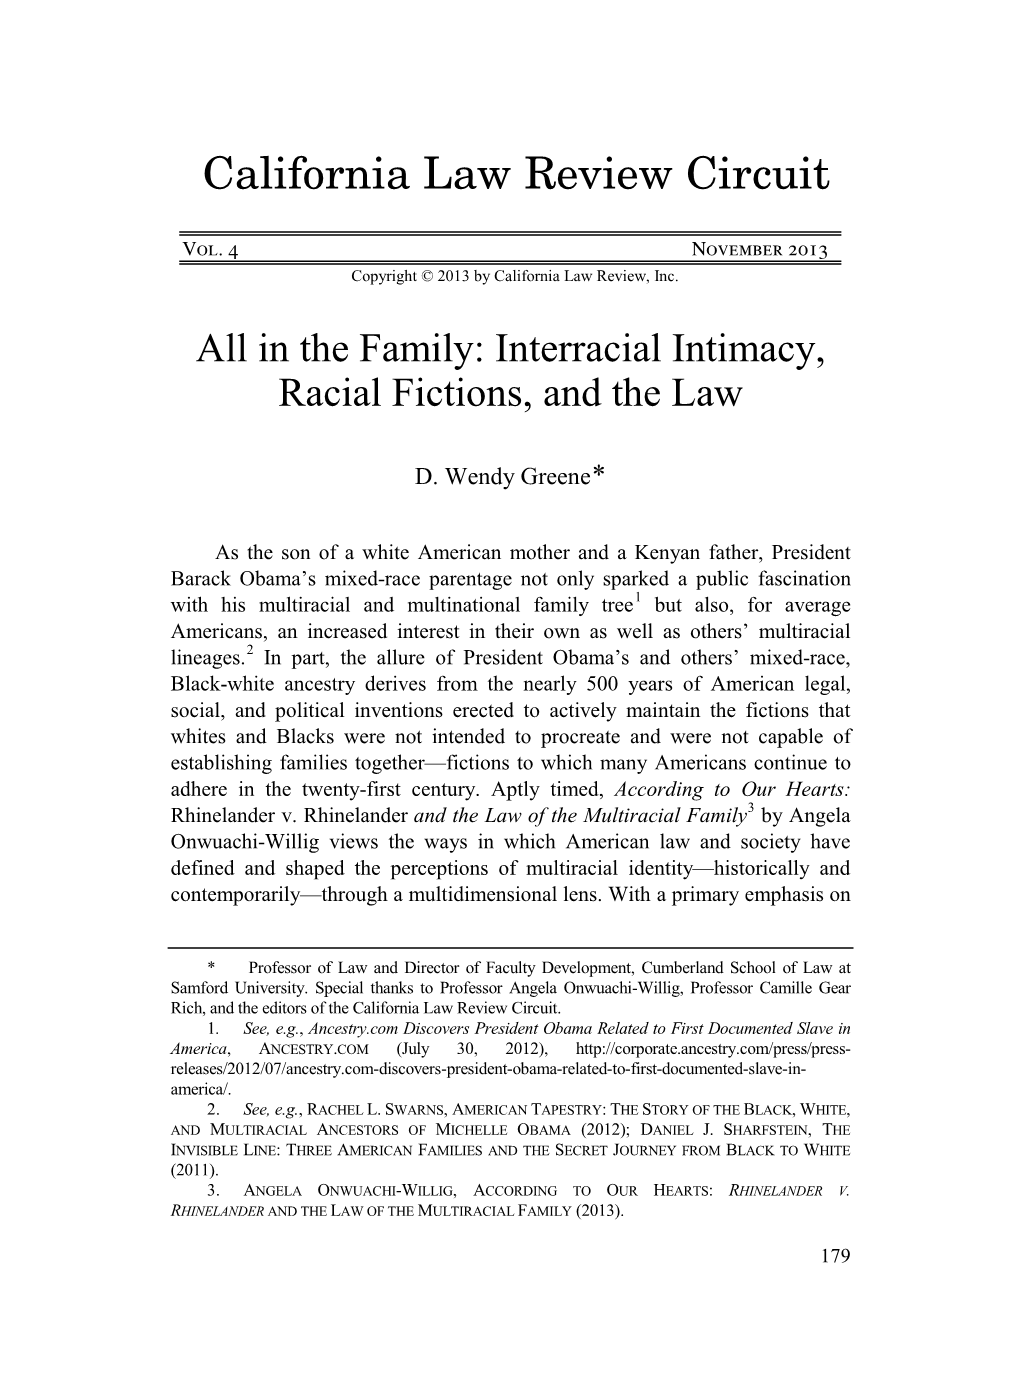 All in the Family: Interracial Intimacy, Racial Fictions, and the Law